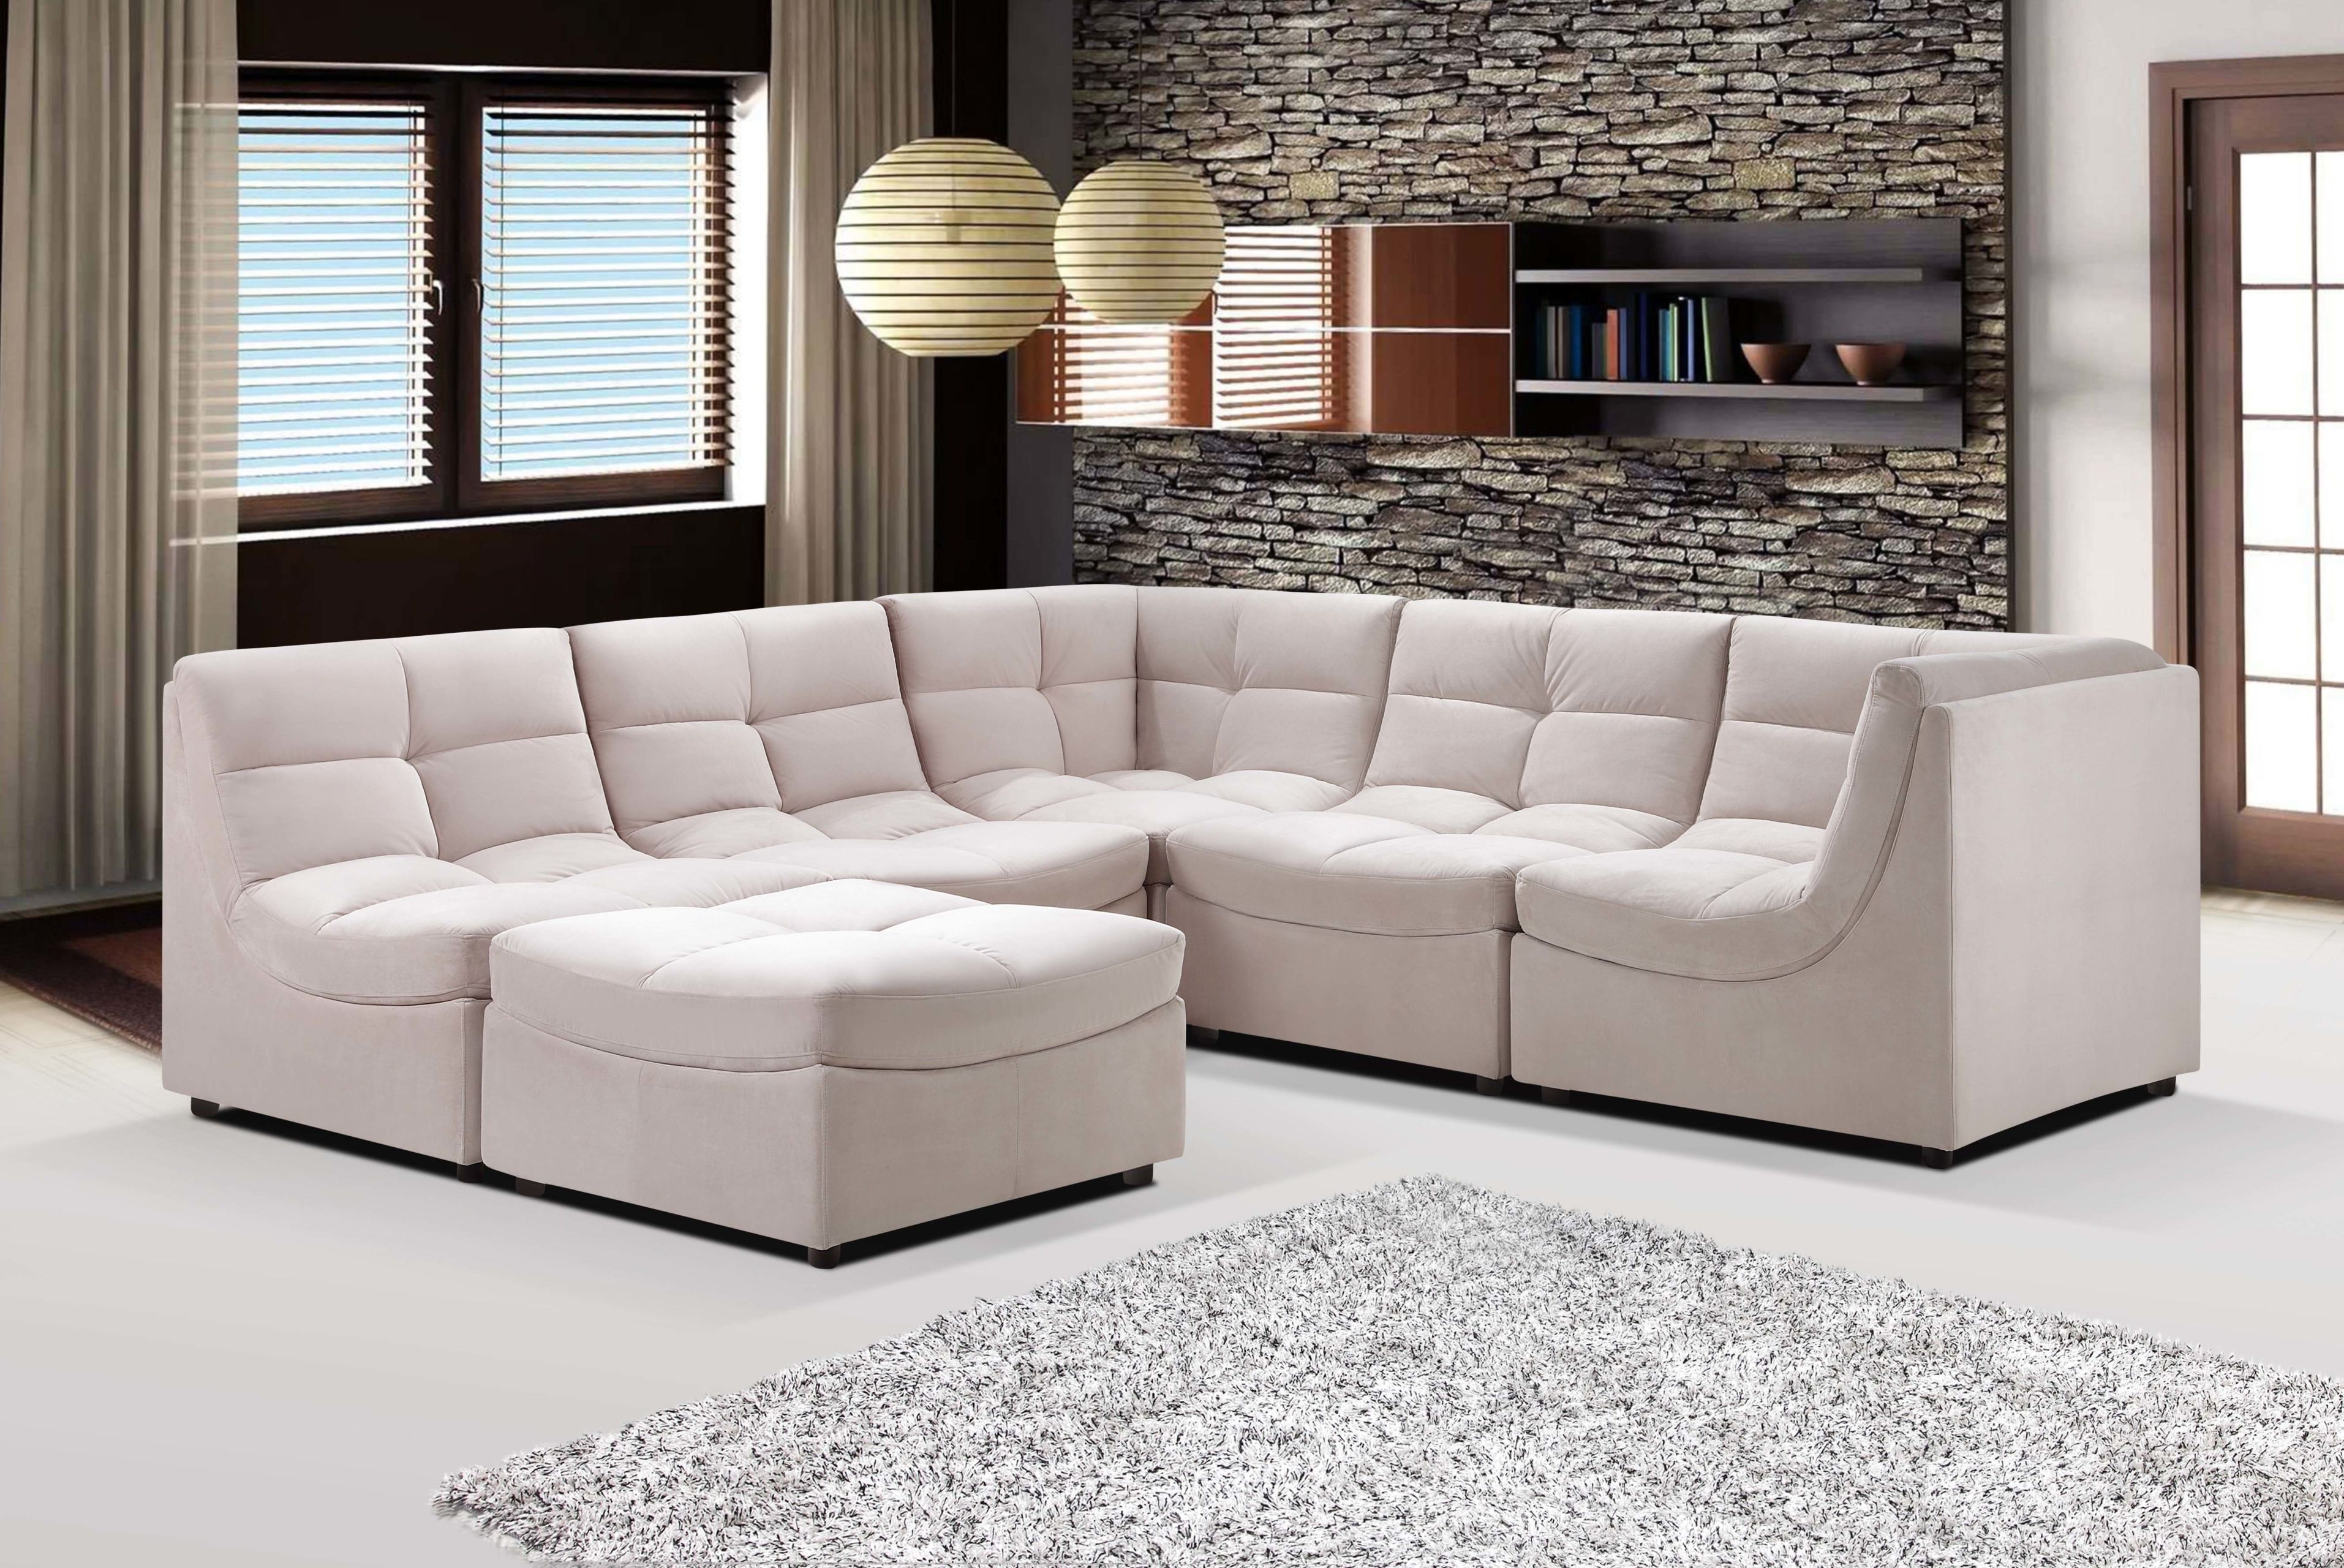 Latest Small Modular Sofas Intended For Luxury Small Modular Sectional Sofa 21 For Your Sofa Sectionals (View 14 of 20)